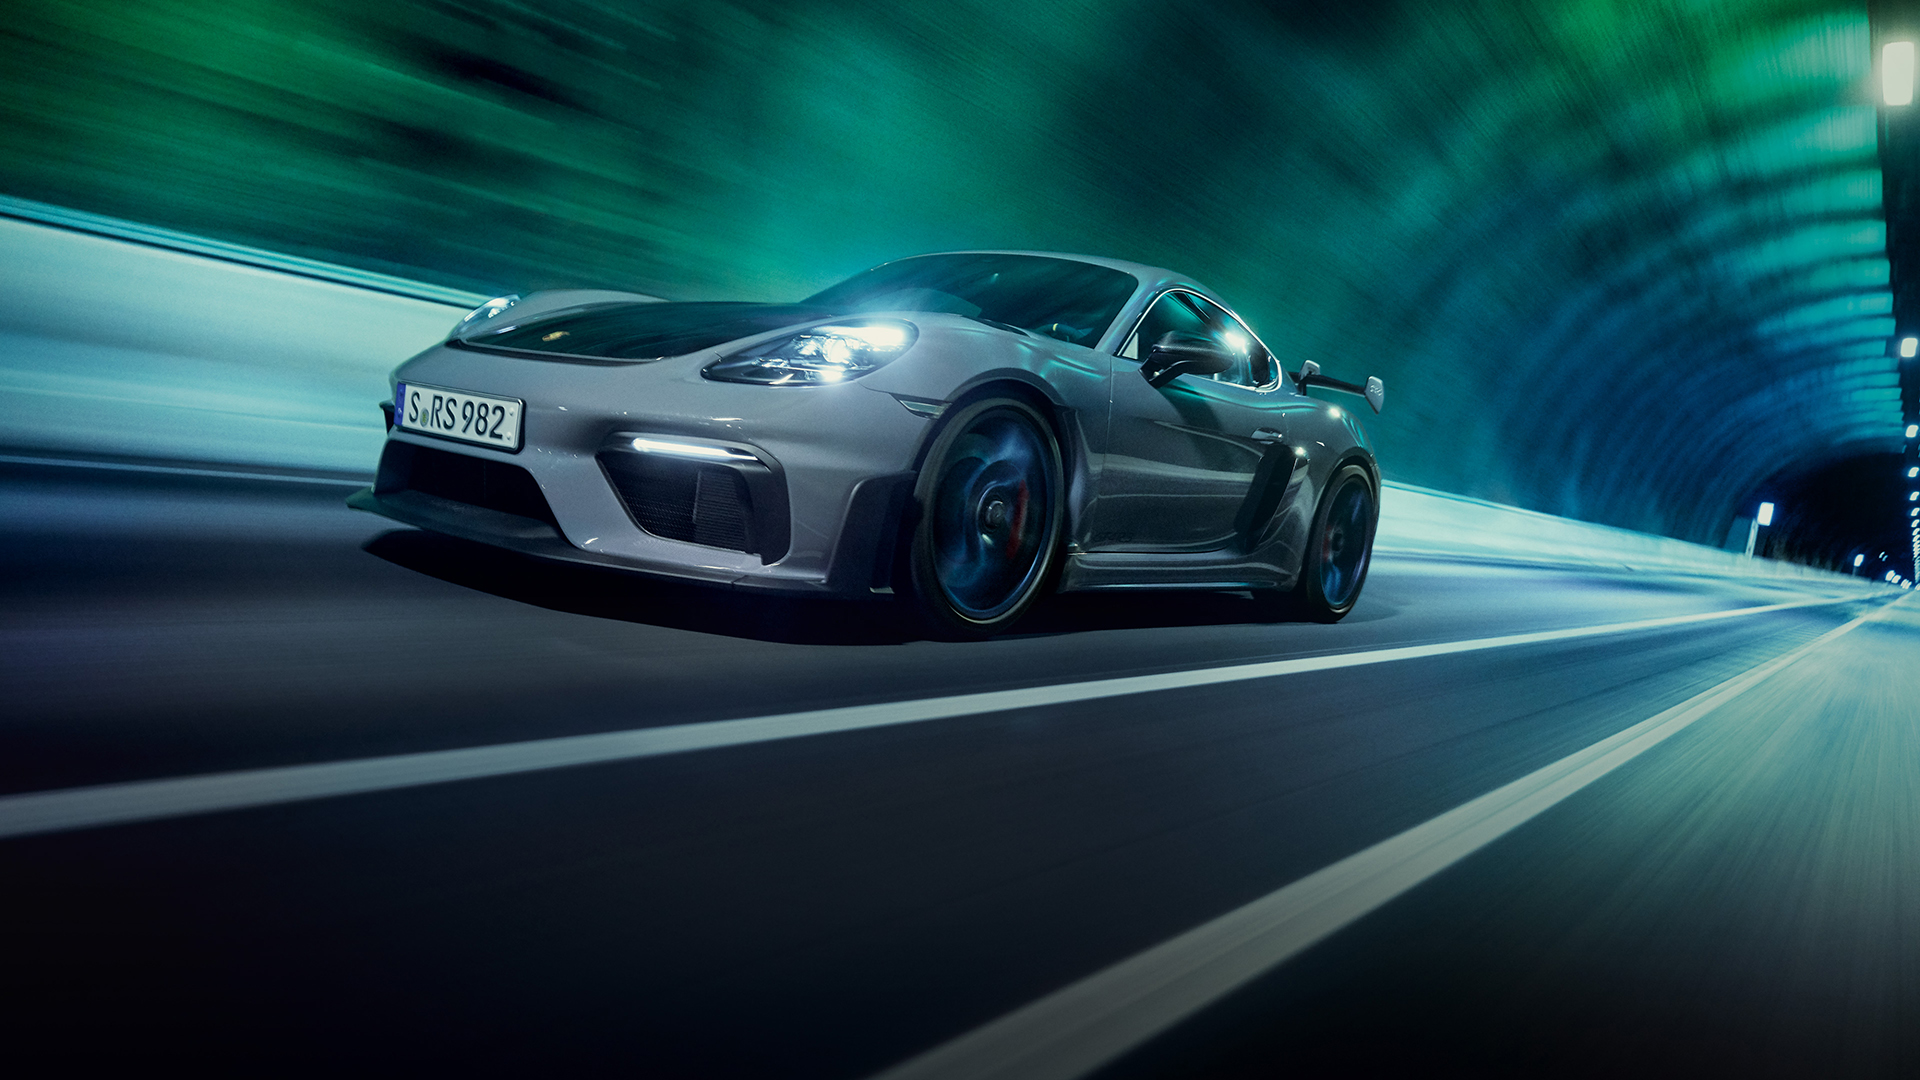 Porsche Cayman GT4 blue car at night 750x1334 iPhone 8/7/6/6S wallpaper,  background, picture, image